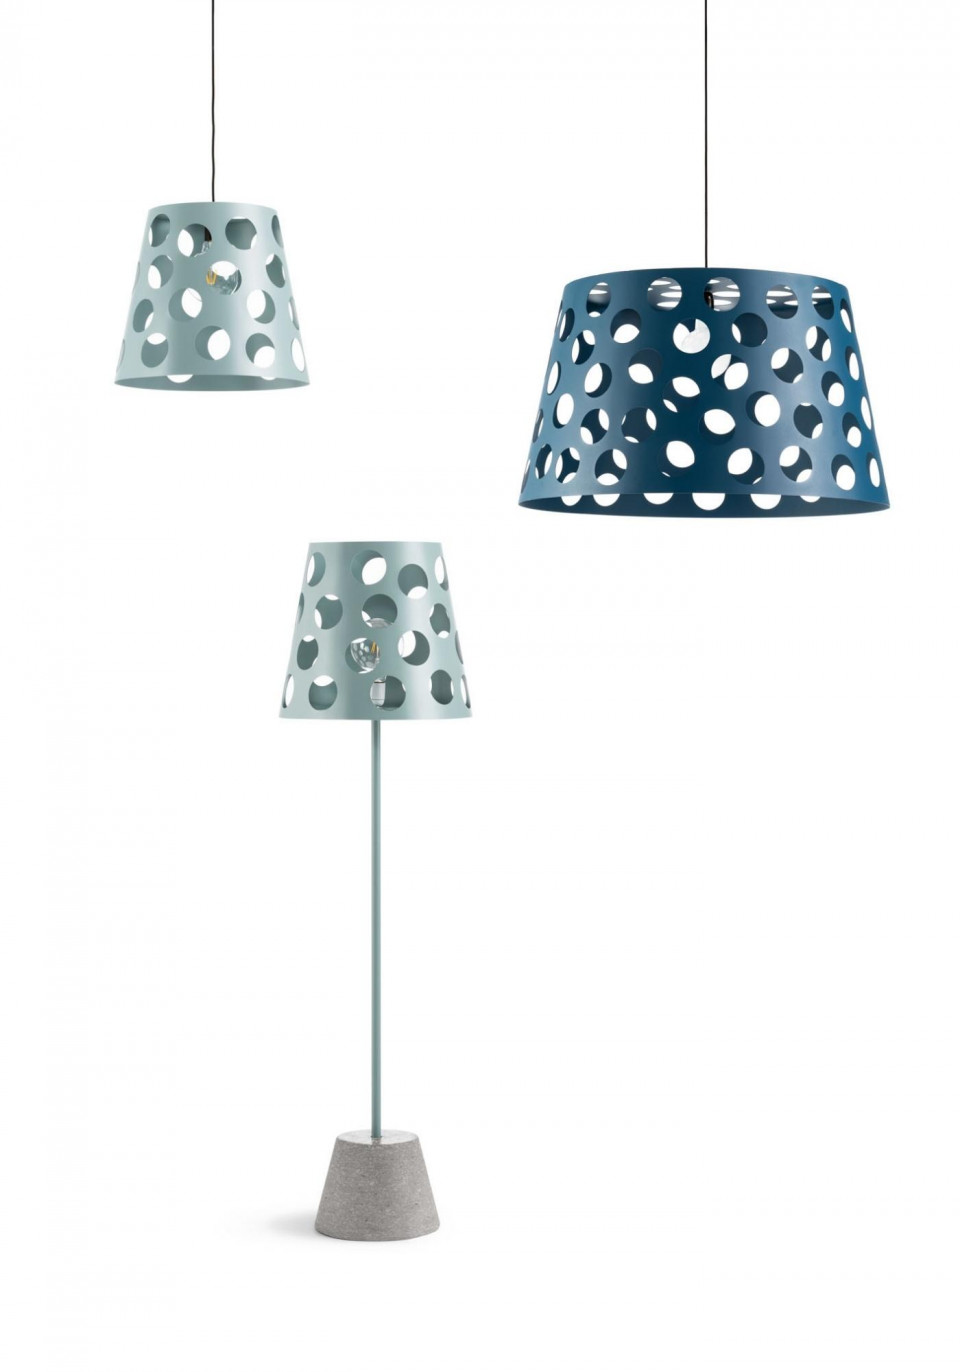 Bolle collection Paola Navone and MIDJ